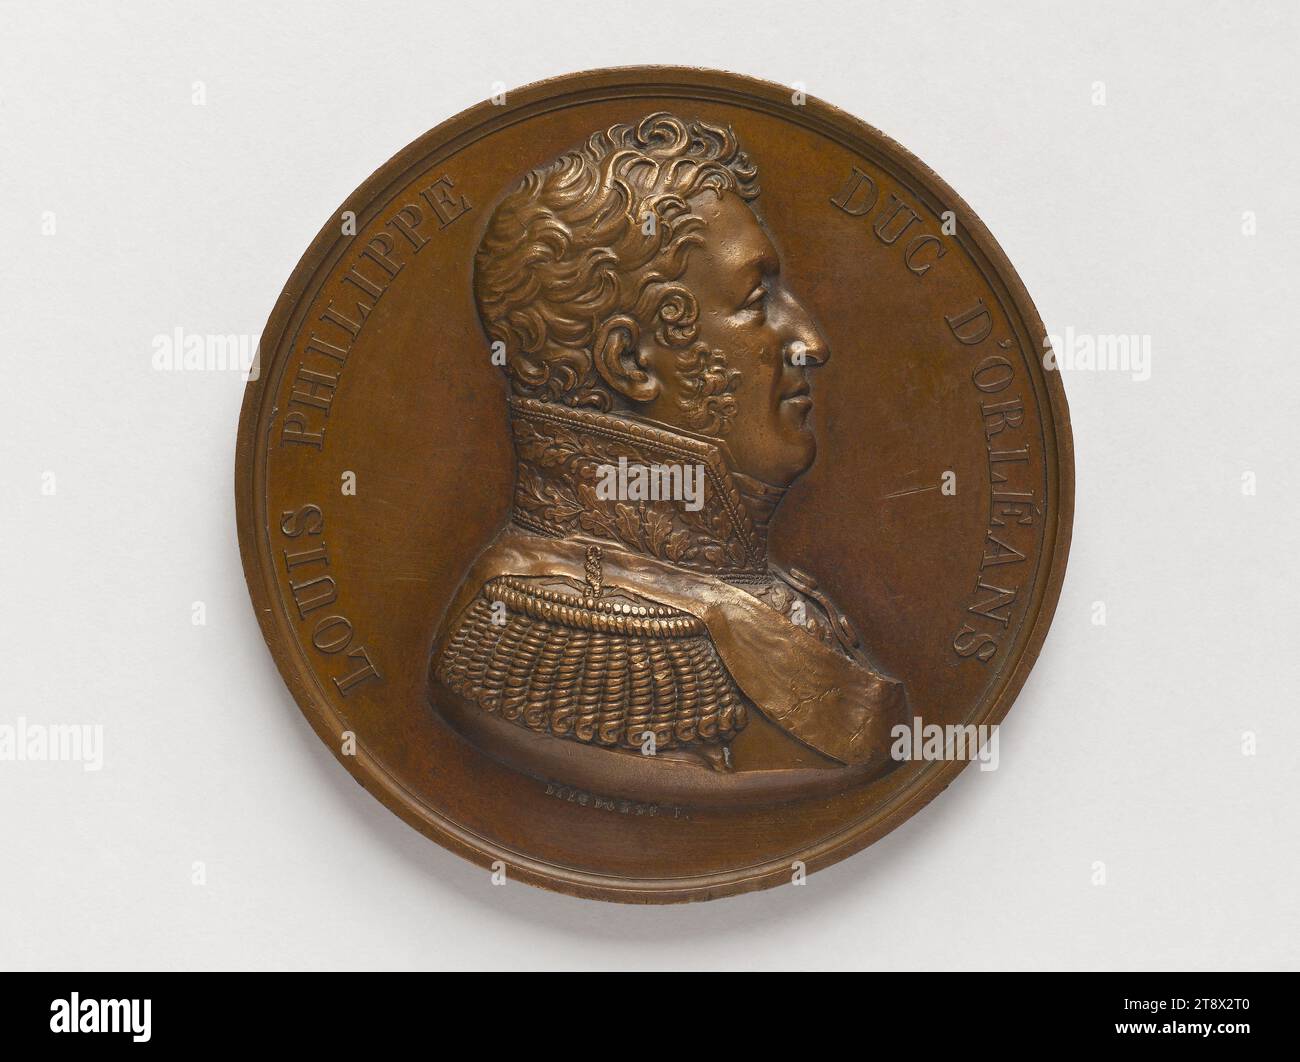 Louis-Philippe d'Orléans (1773-1850), Duke of Orléans, King of the French (1830-1848), 1818, Dieudonné, Jacques-Augustin, Engraver in medals, In 1818, Numismatics, Medal, Dimensions - Work: Diameter: 6.8 cm, Weight (type dimension): 145.76 g Stock Photo